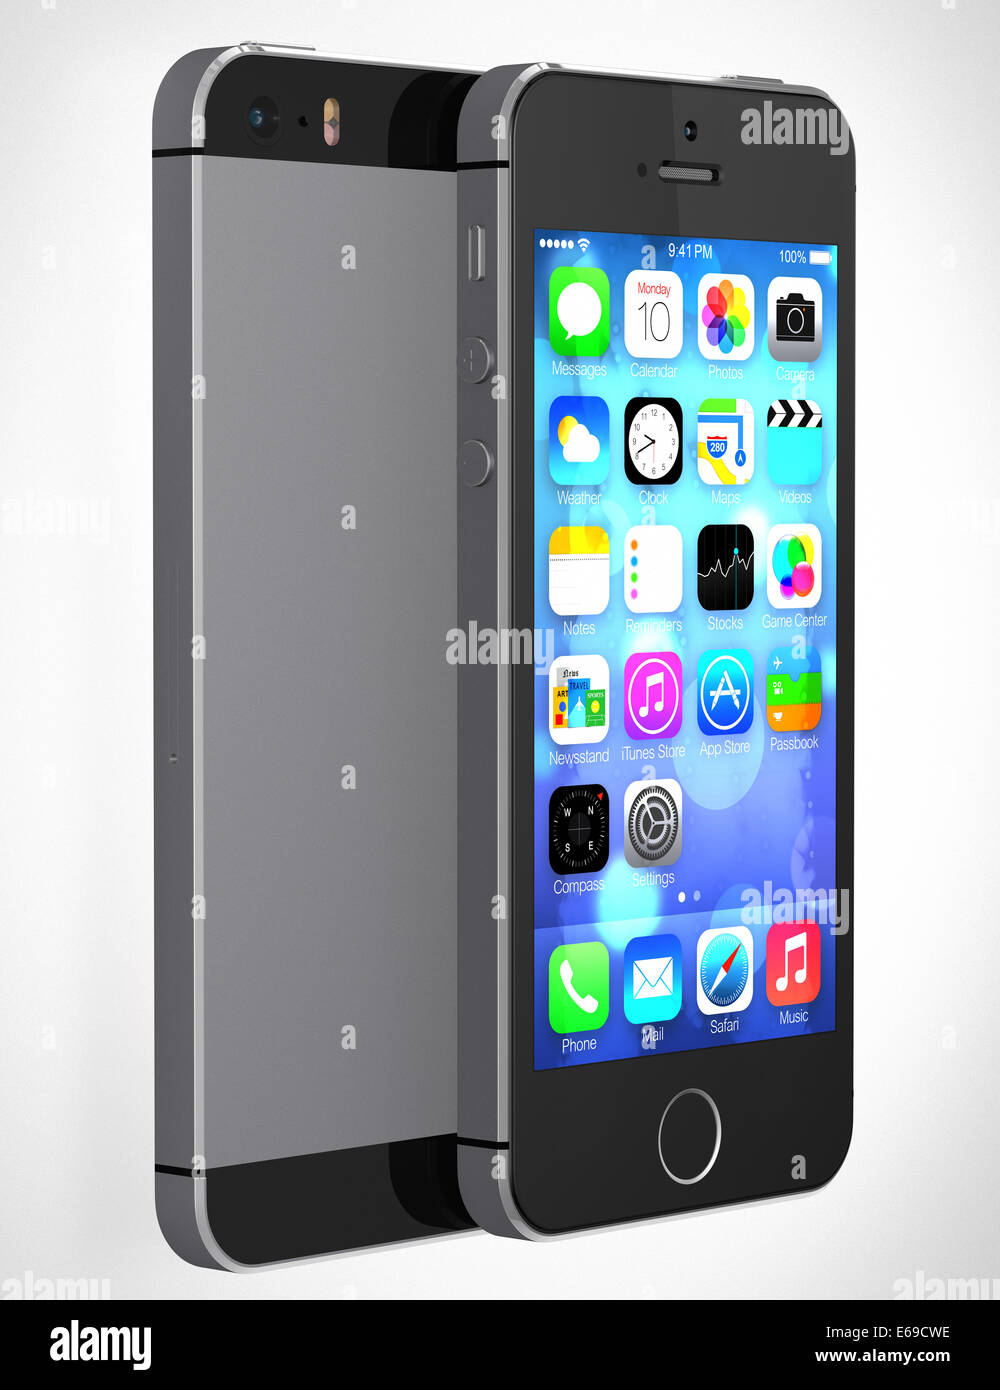 A front view of an Apple iPhone 5s showing the home screen with iOS7 Stock Photo